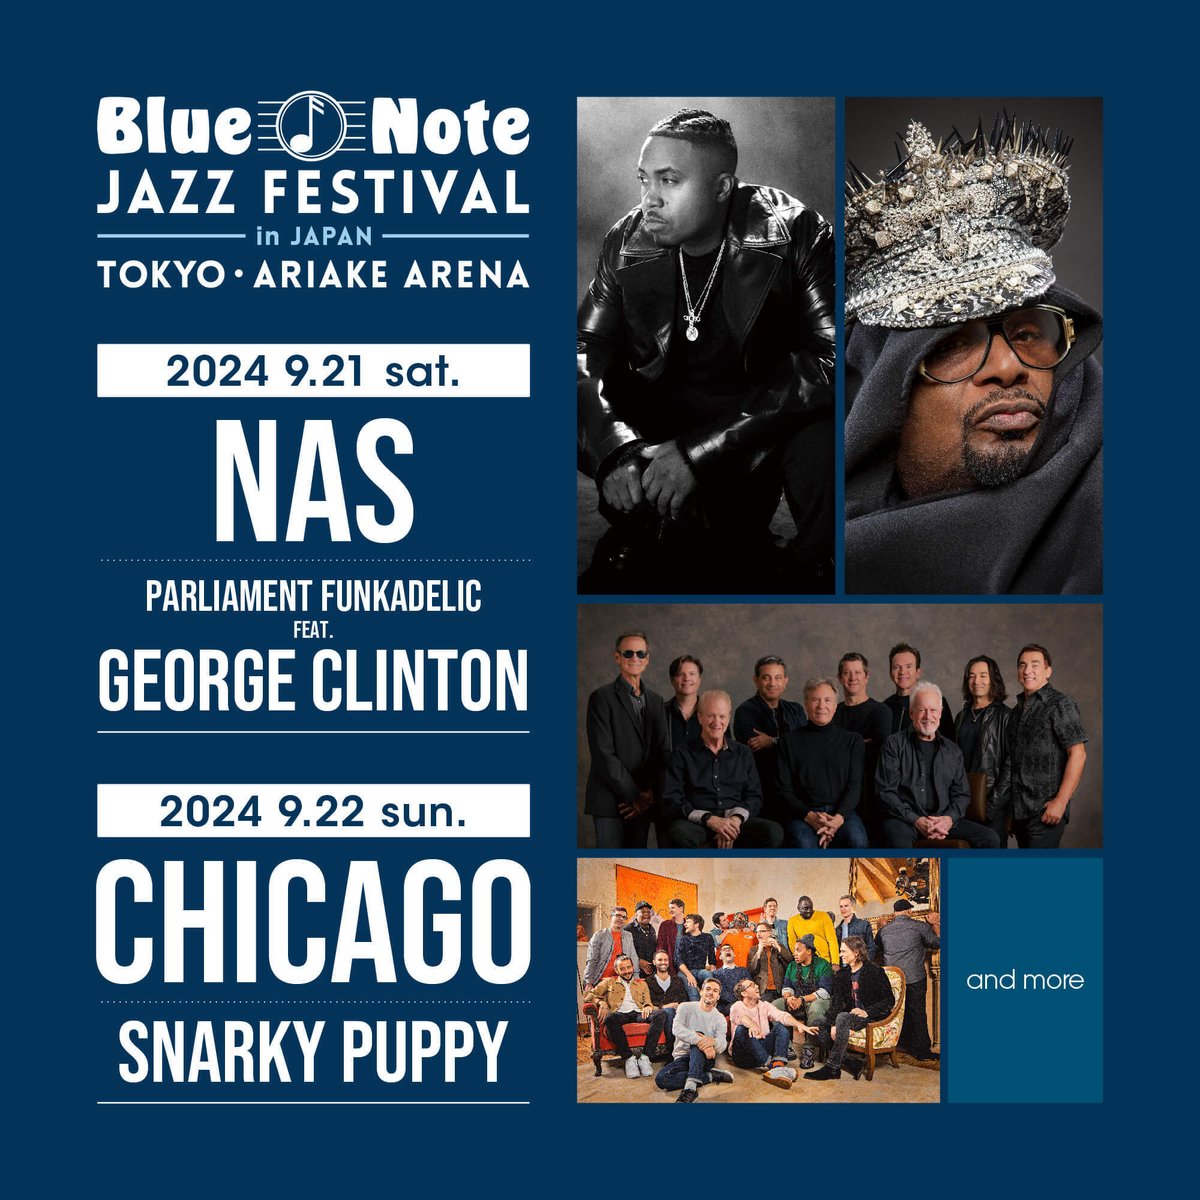 「Blue Note JAZZ FESTIVAL in JAPAN」
東京・有明アリーナにて、8 年ぶりの開催が実現!
第1弾アーティスト発表！！
 
＜出演＞
9/21(土) NAS / PARLIAMENT FUNKADELIC FEAT. GEORGE CLINTON
9/22(日) CHICAGO / SNARKY PUPPY
and more…
 
詳細はこちら
creativeman.co.jp/2024/05/15/939…

#BNJF2024